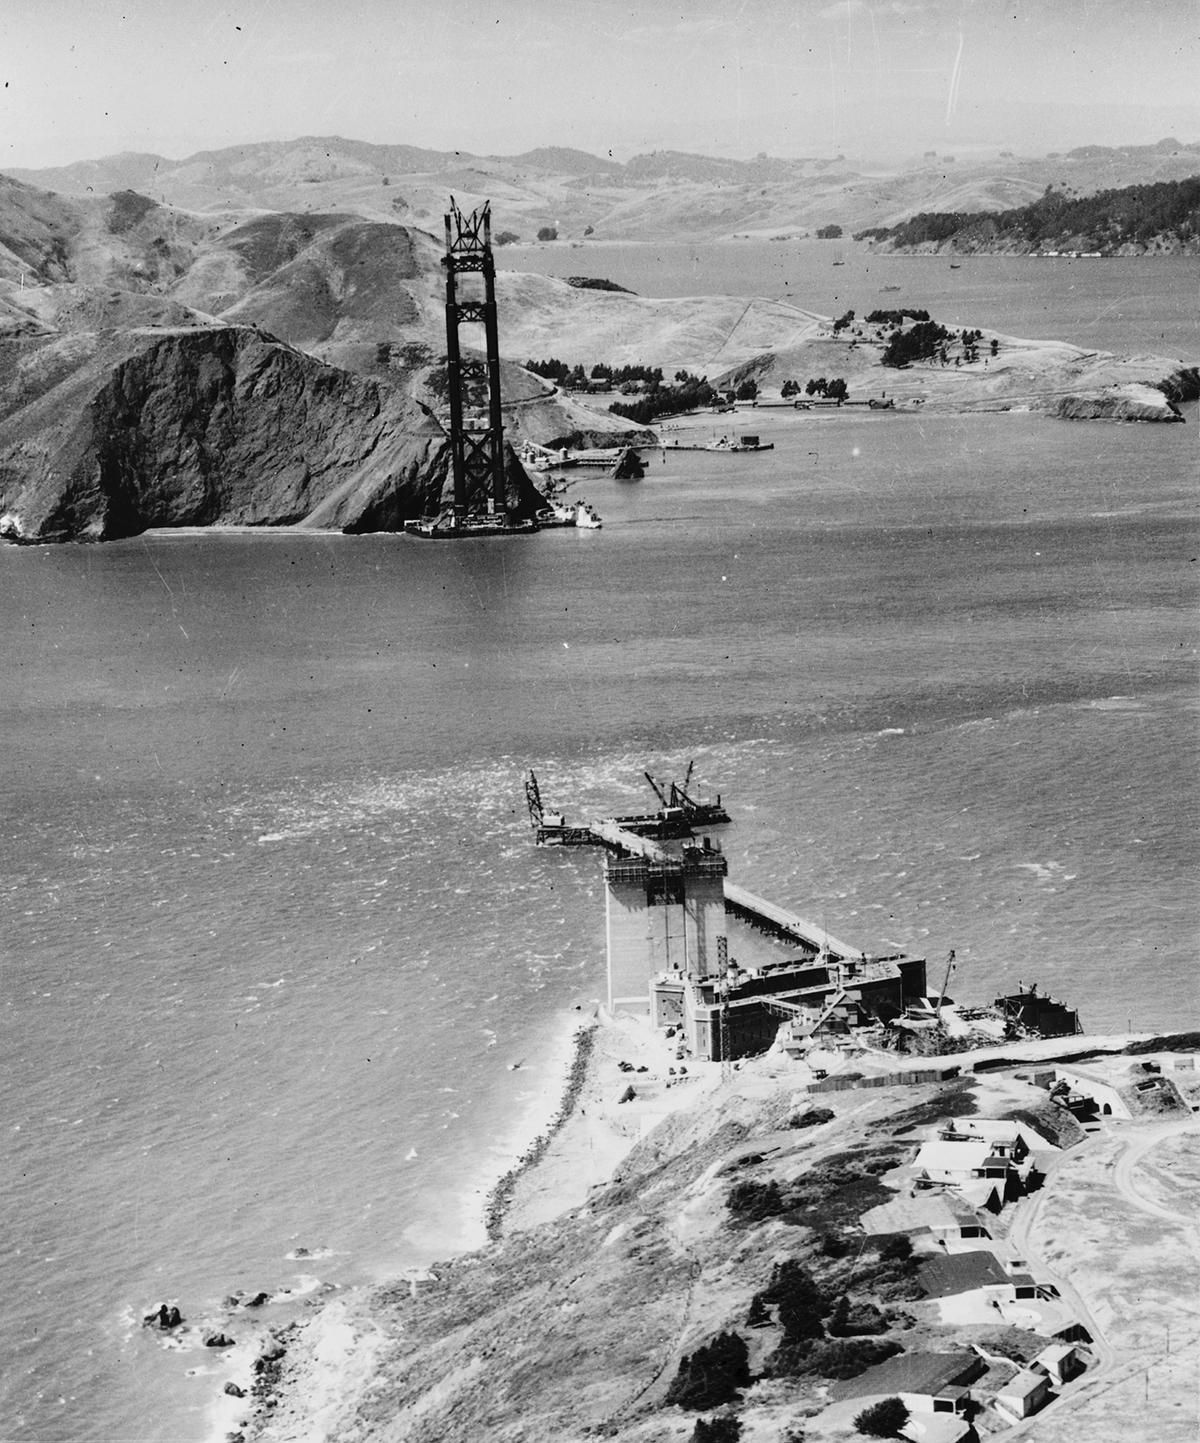 The Golden Gate Bridge under construction, circa 1934. Photographed by Chas. M. Hiller. Library of Congress. (Public Domain)